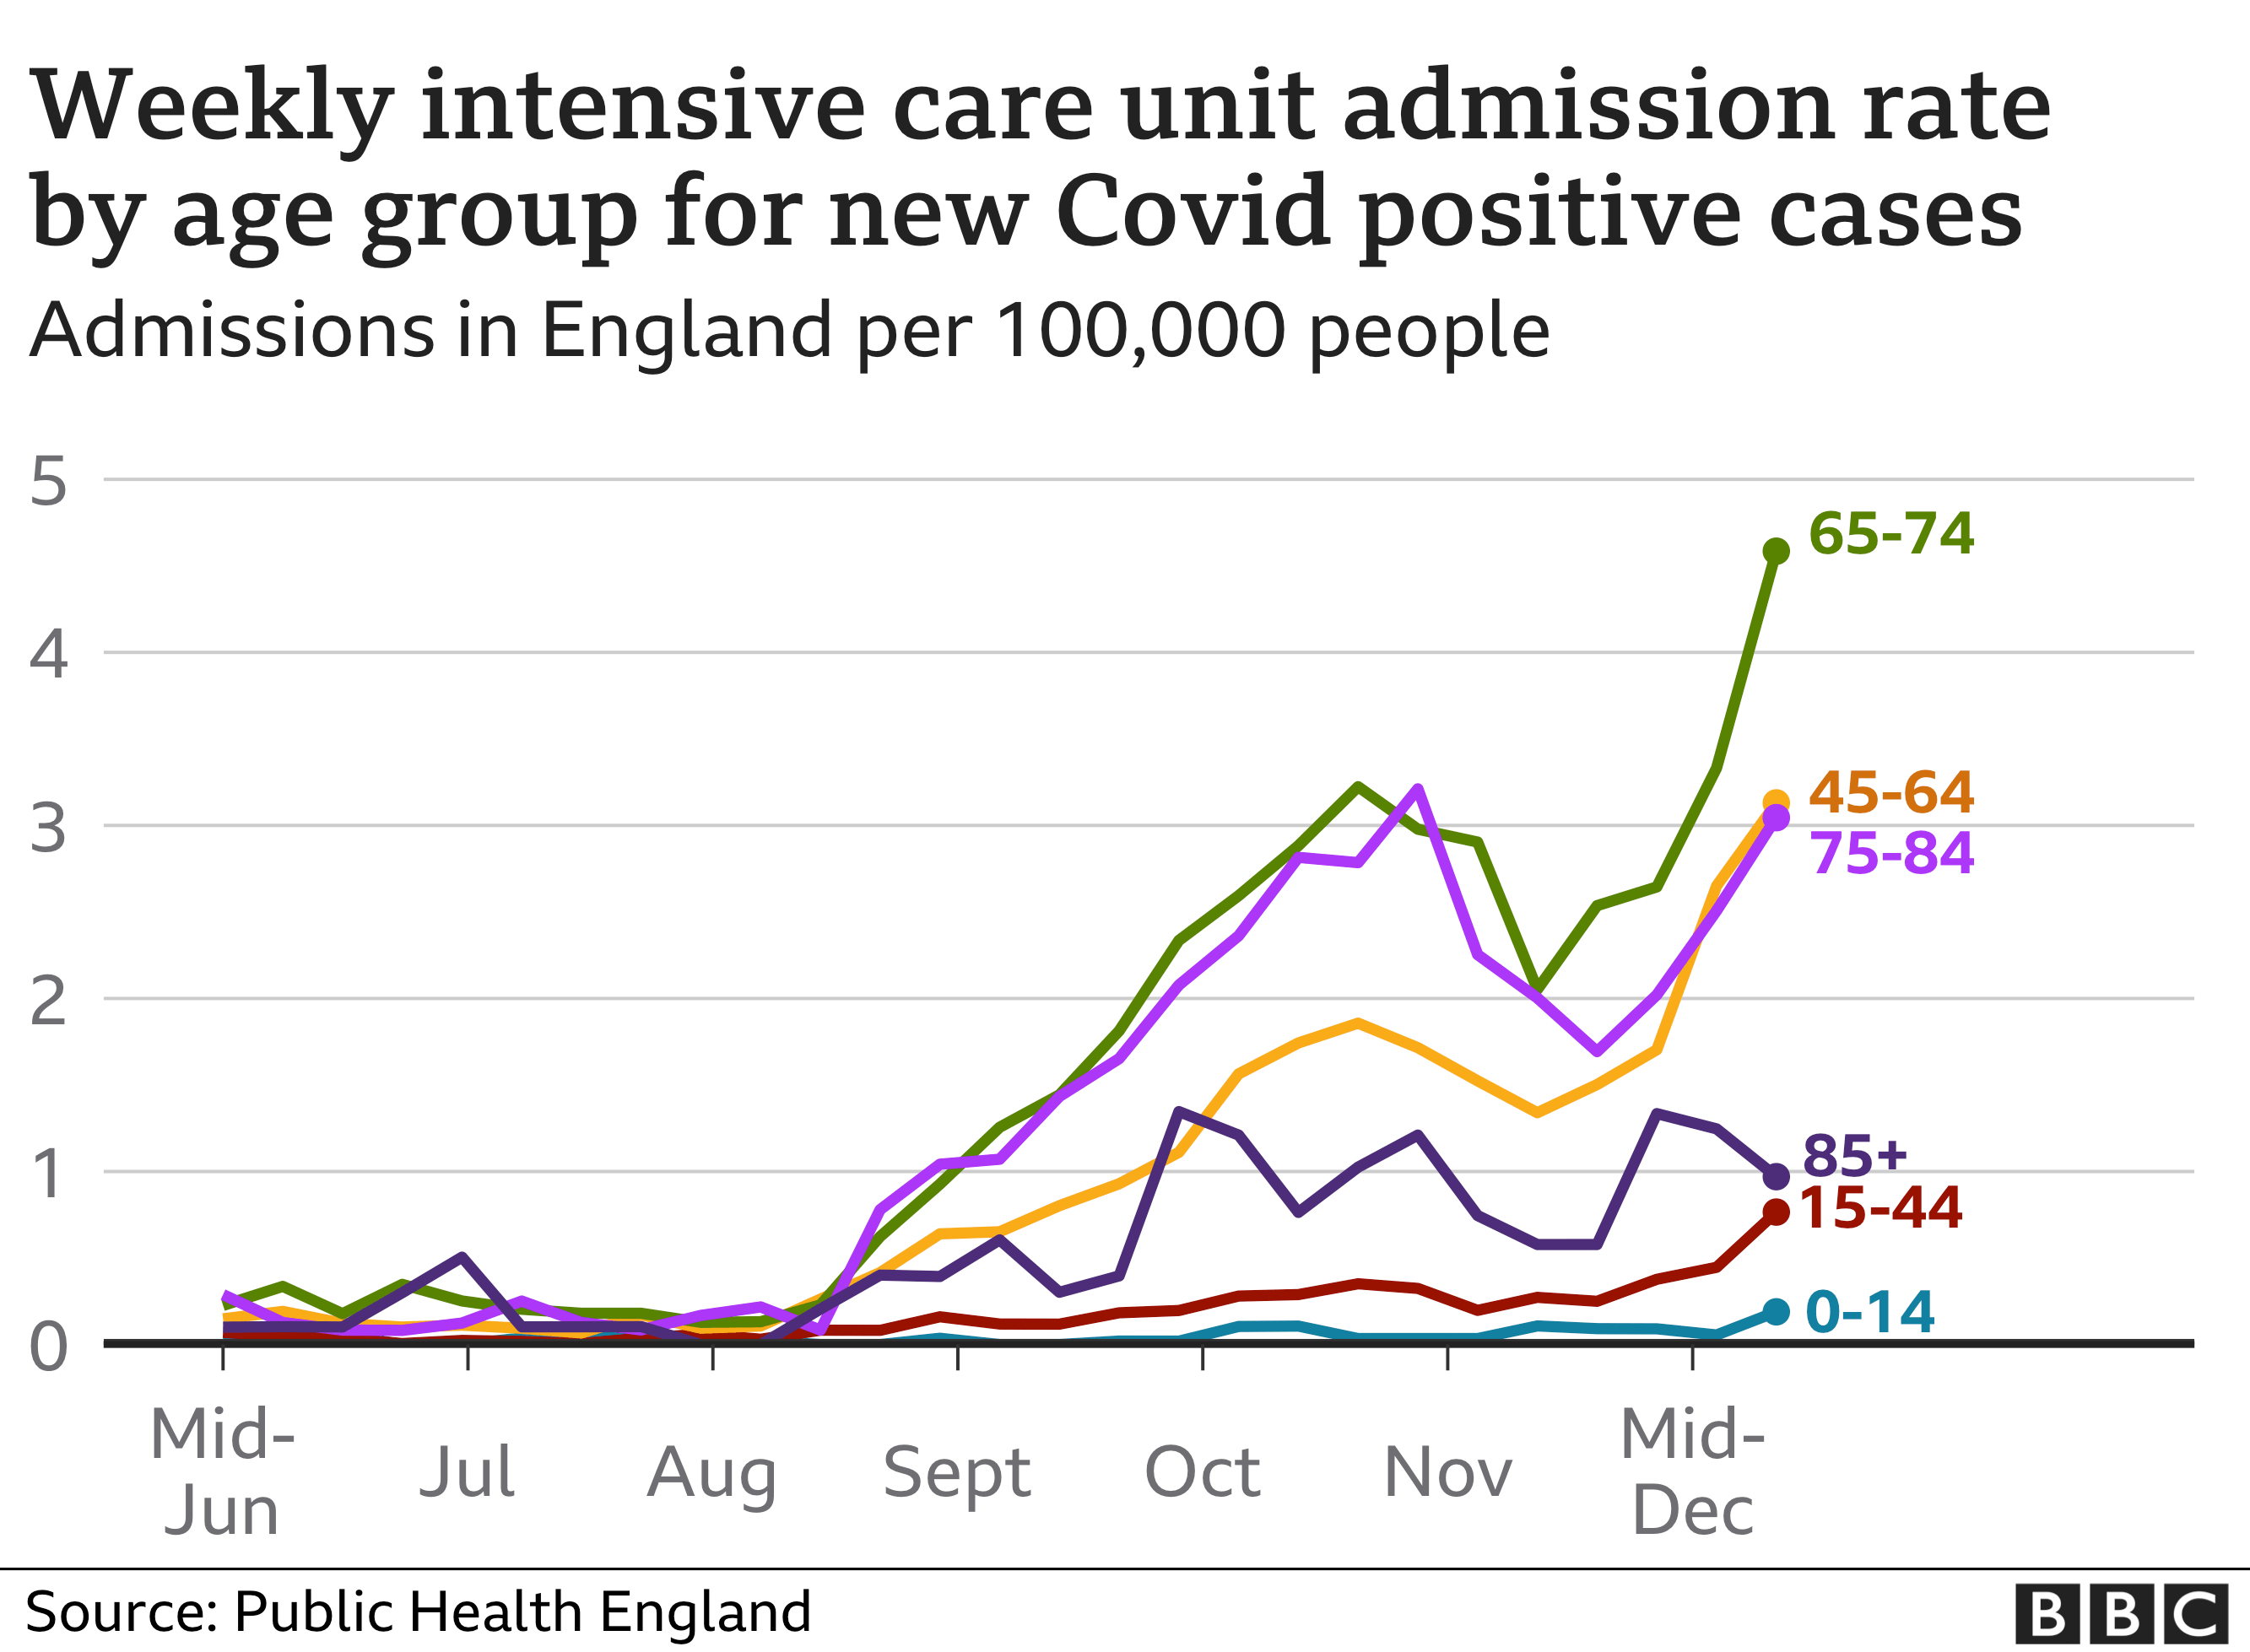 Covid intensive care admission rates by age groups